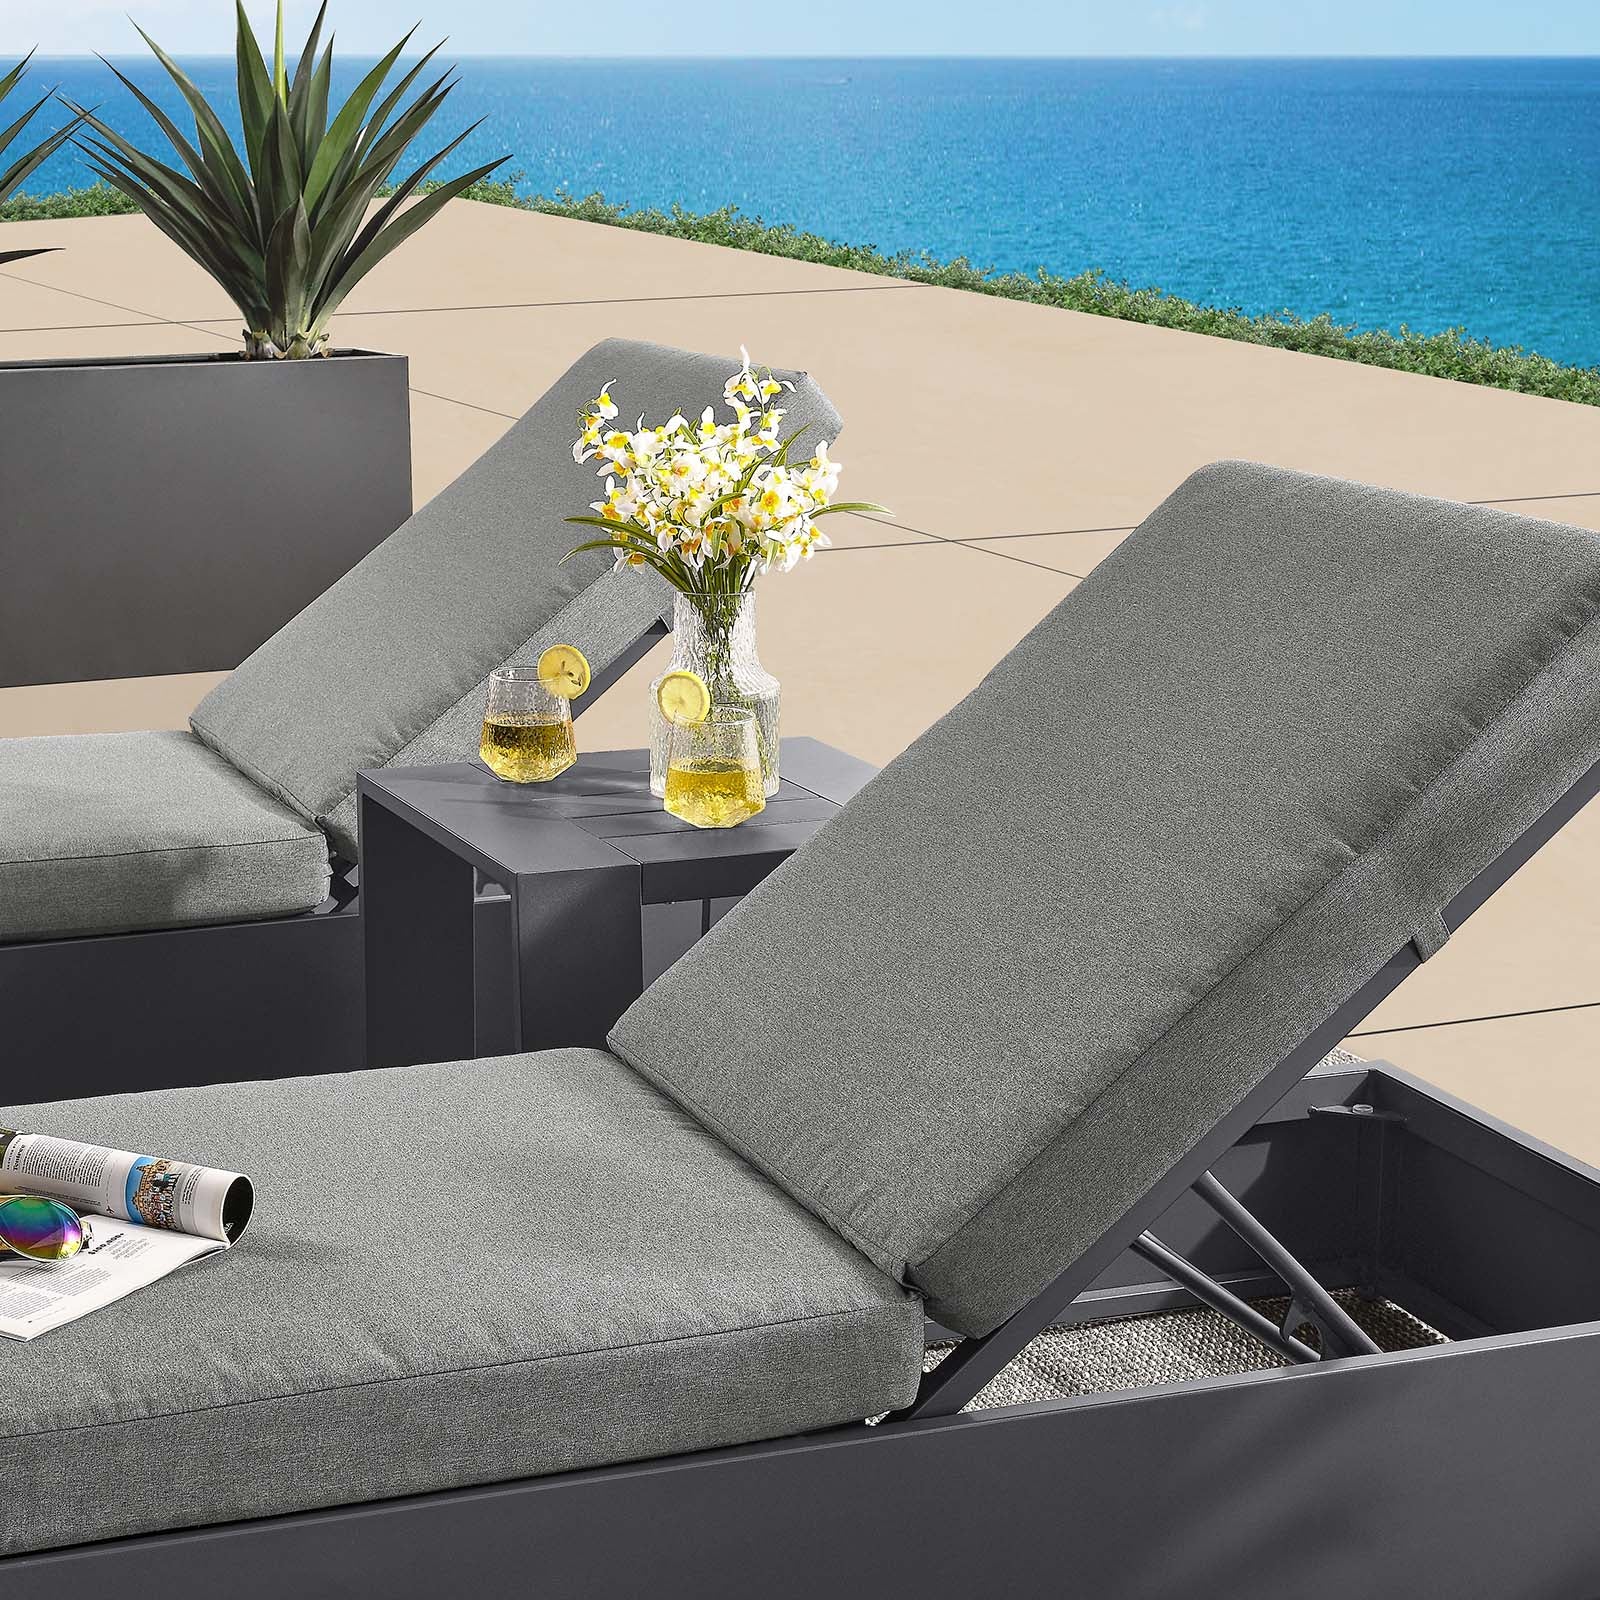 Tahoe Outdoor Patio Powder-Coated Aluminum 3-Piece Chaise Lounge Set - East Shore Modern Home Furnishings